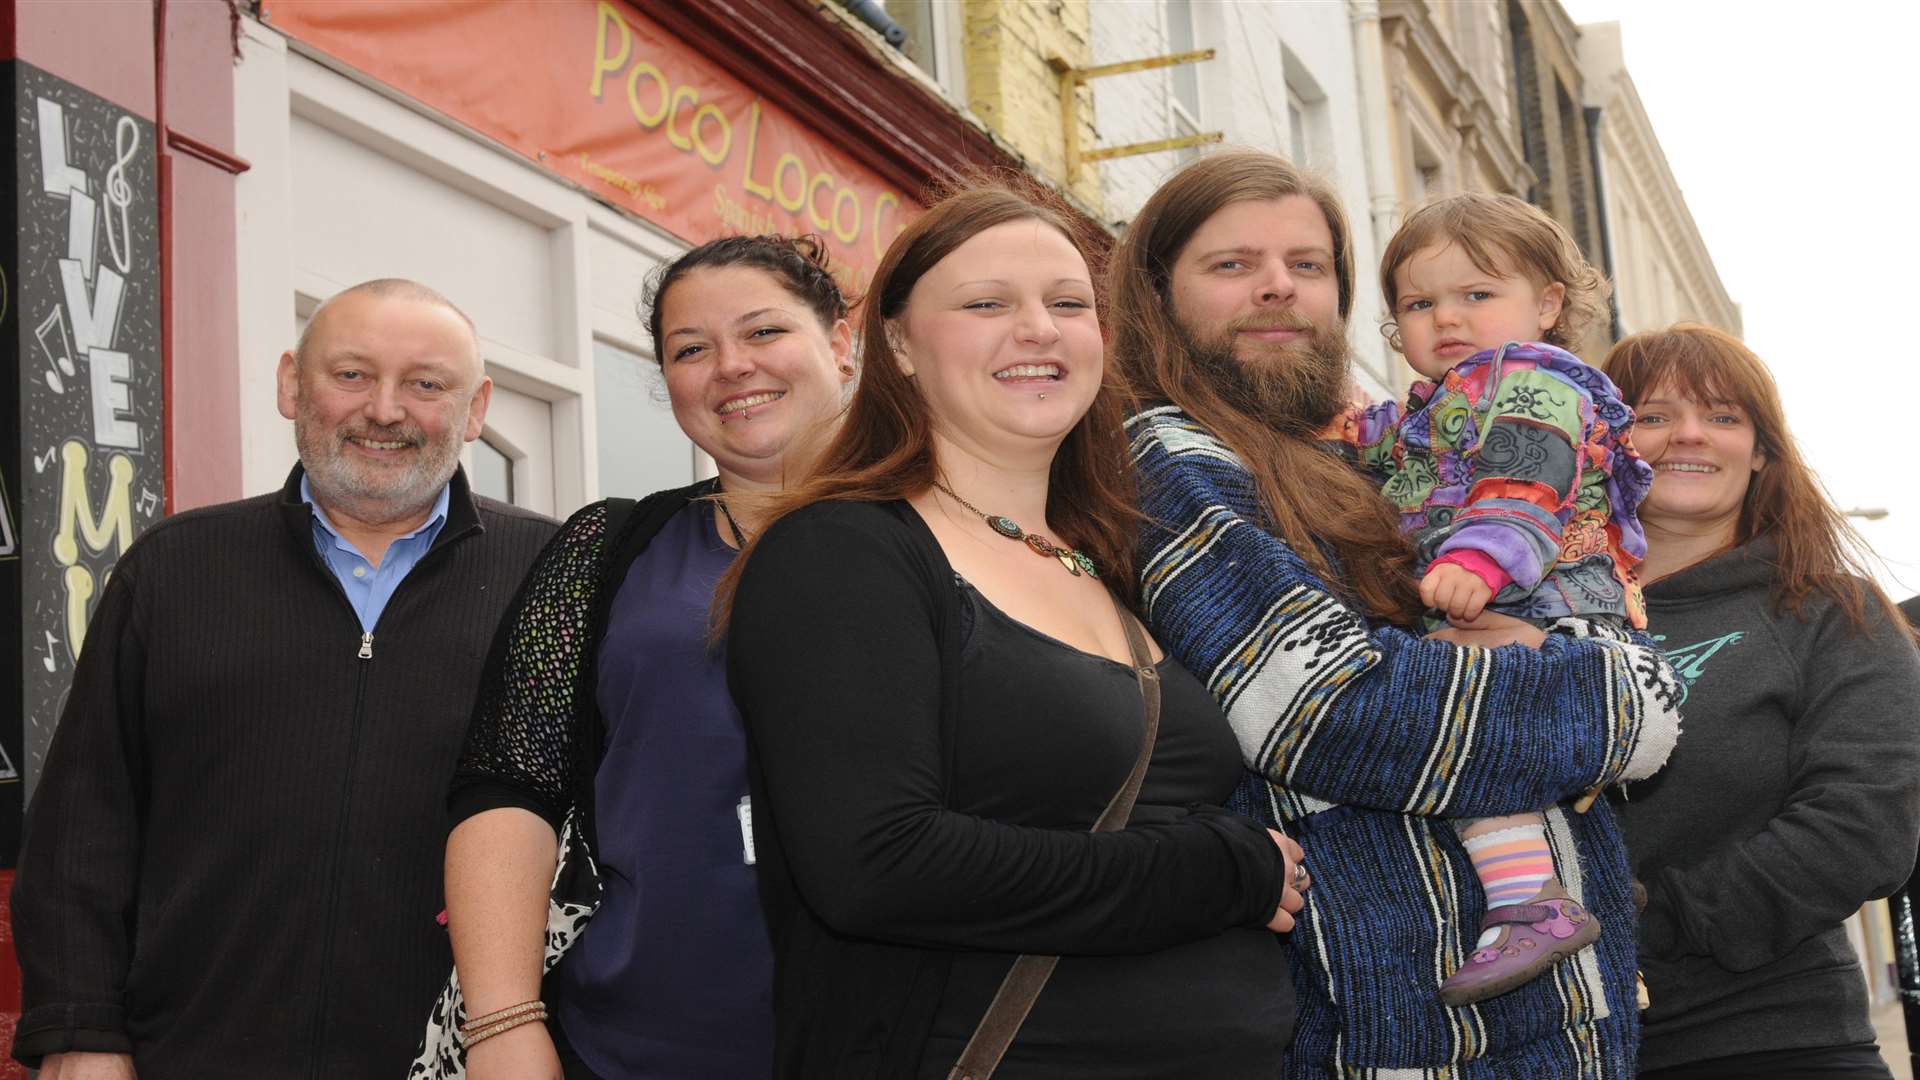 Dave Smeed, Liz Goatley, Adam and Stacey Barron with Esme and Lucy Harvey. Picture: Steve Crispe.